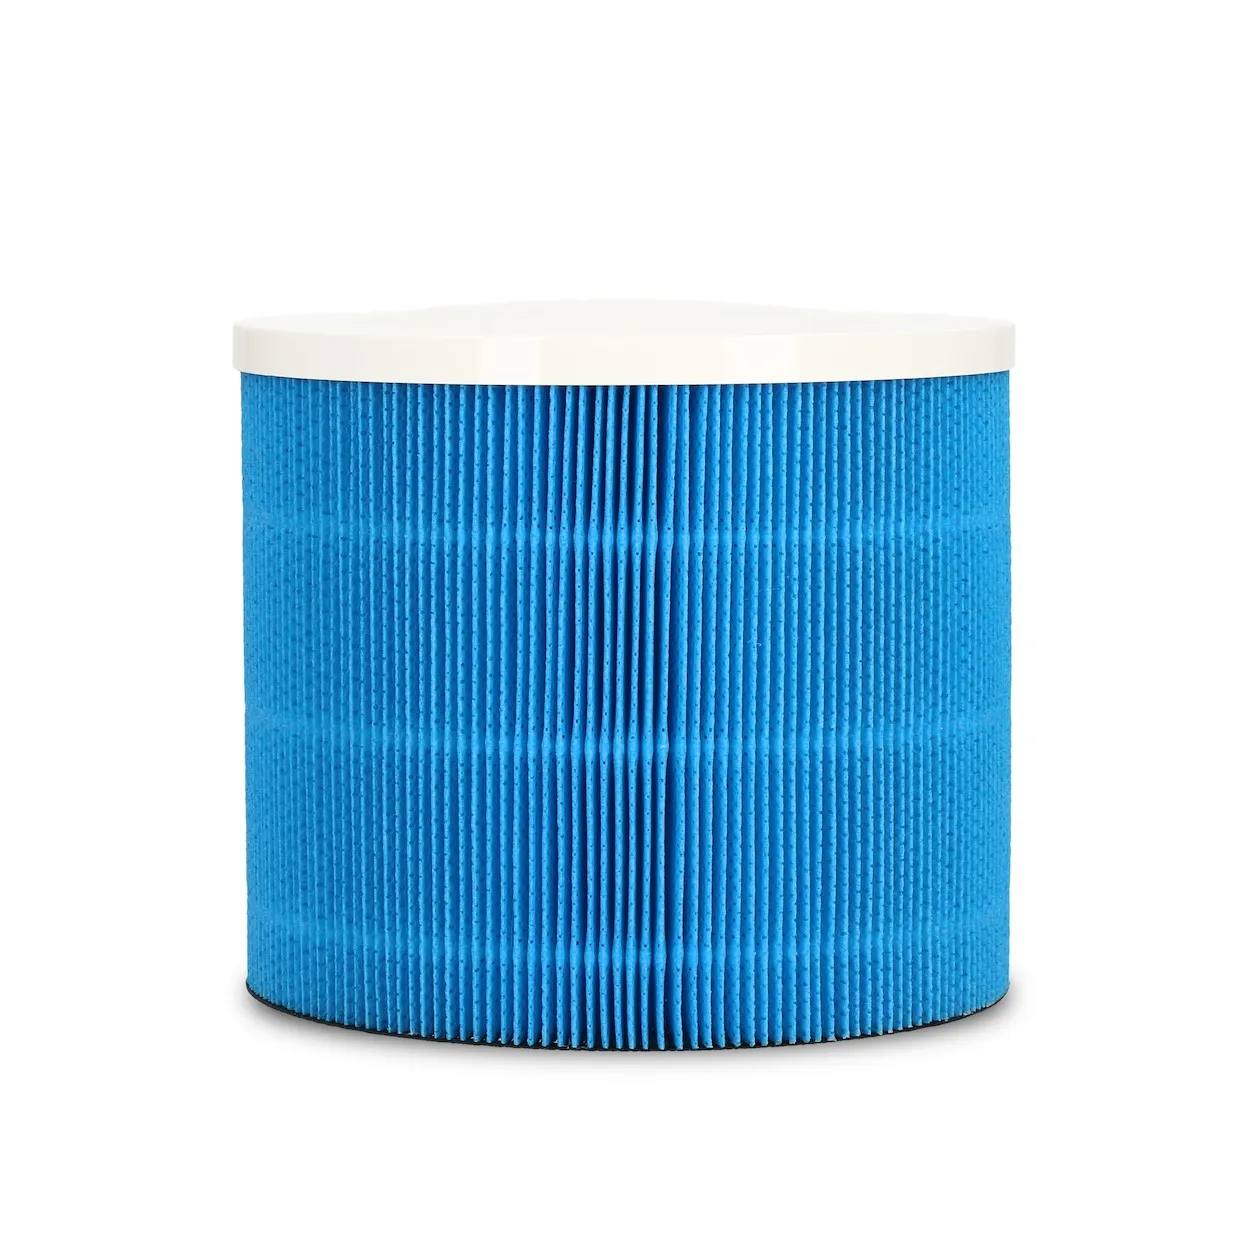 Duux PET + Nylon Filter for Ovi Humidifier